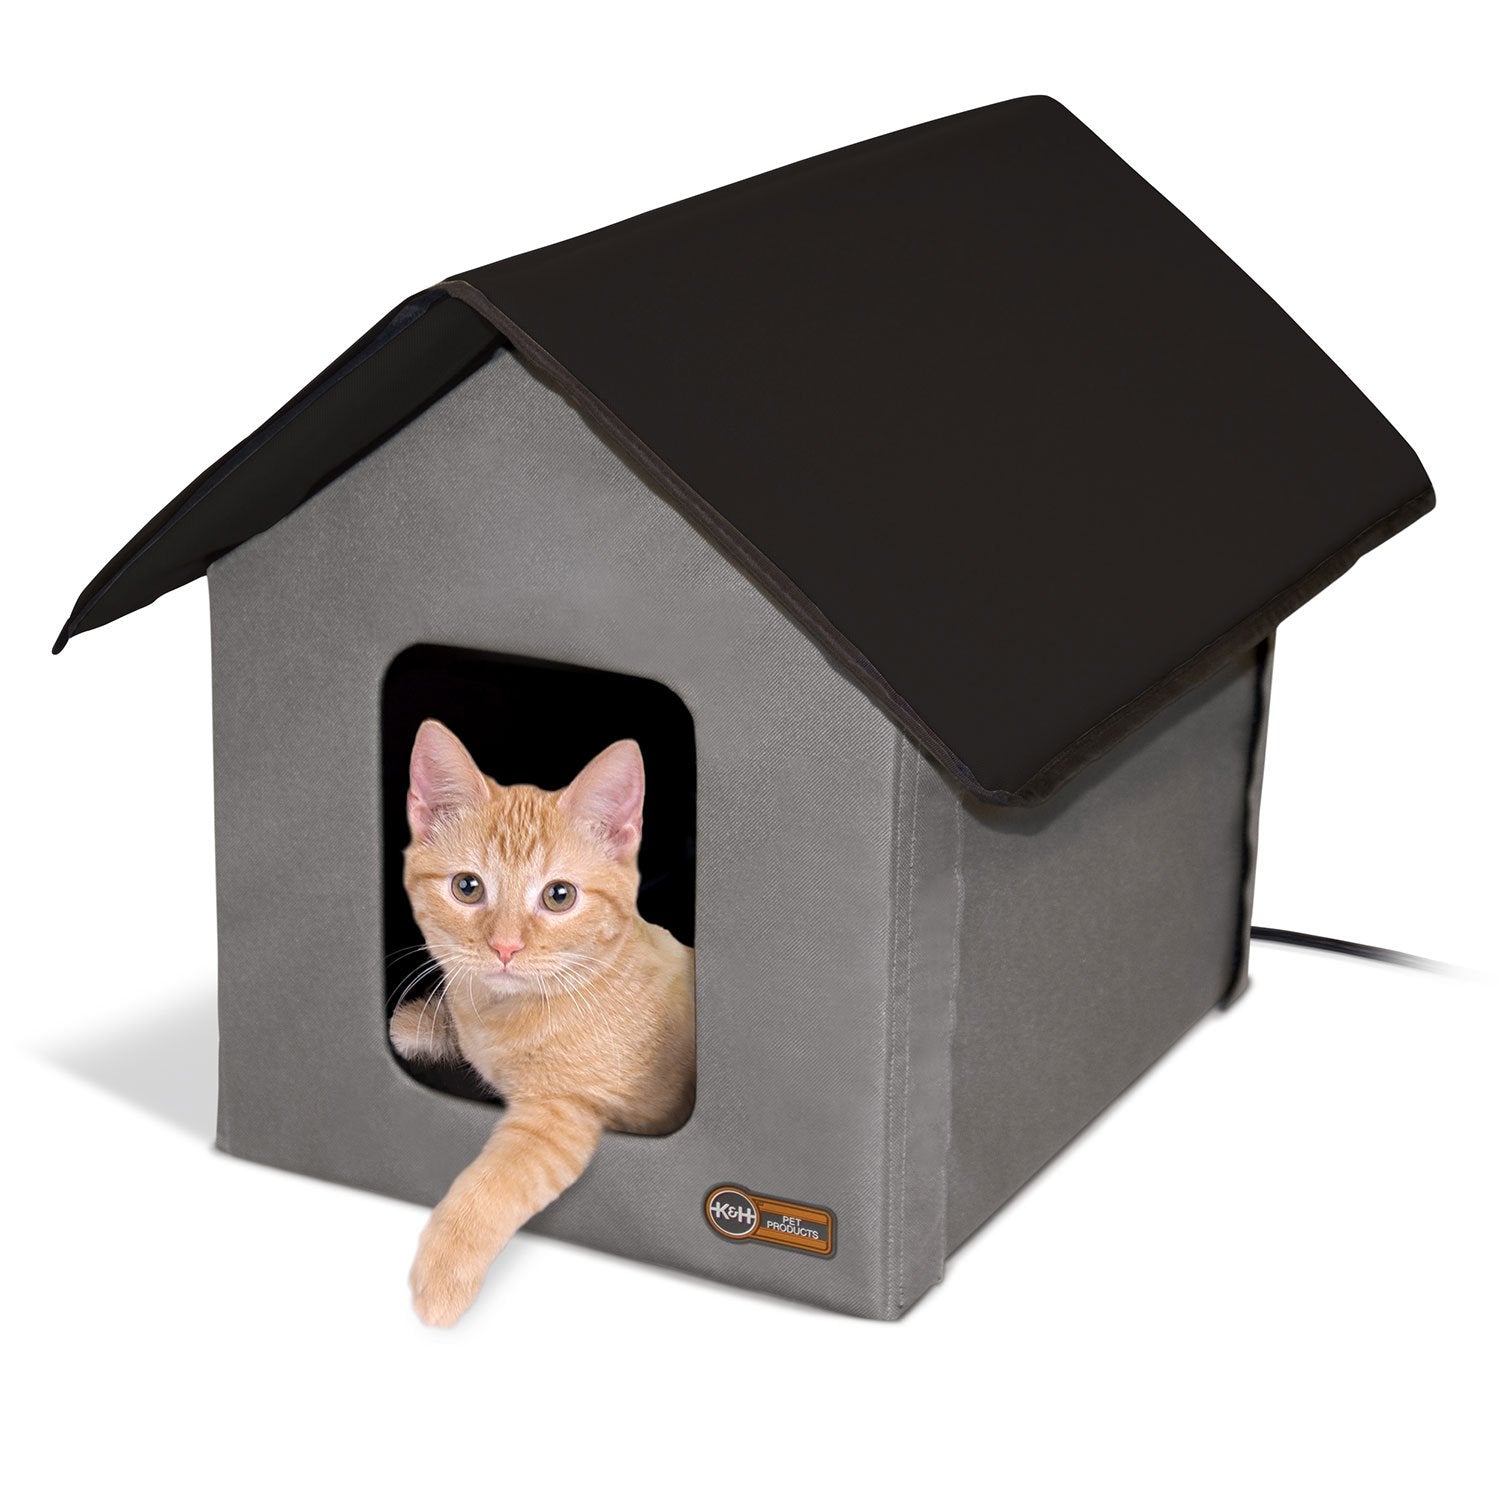 K&h Pet Products Kh3996 Heated Outdoor Kitty House